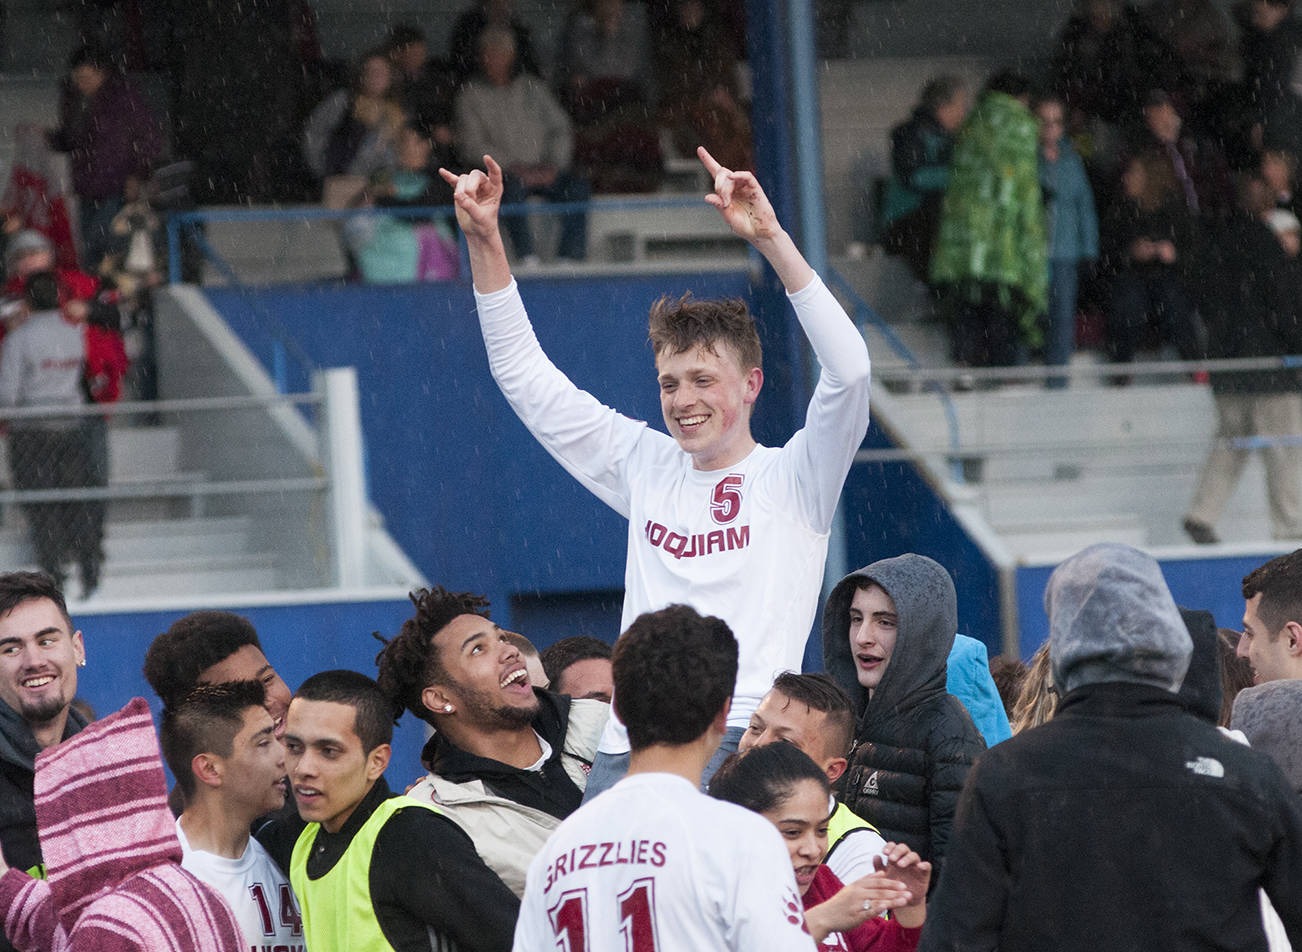 (Brendan Carl | The Daily World) Hoquiam’s Parker McCormick is hoisted up by teammates after making the game-winning penalty kick in the Grizzlies shootout victory over Montesano at Stewart Field on Thursday.